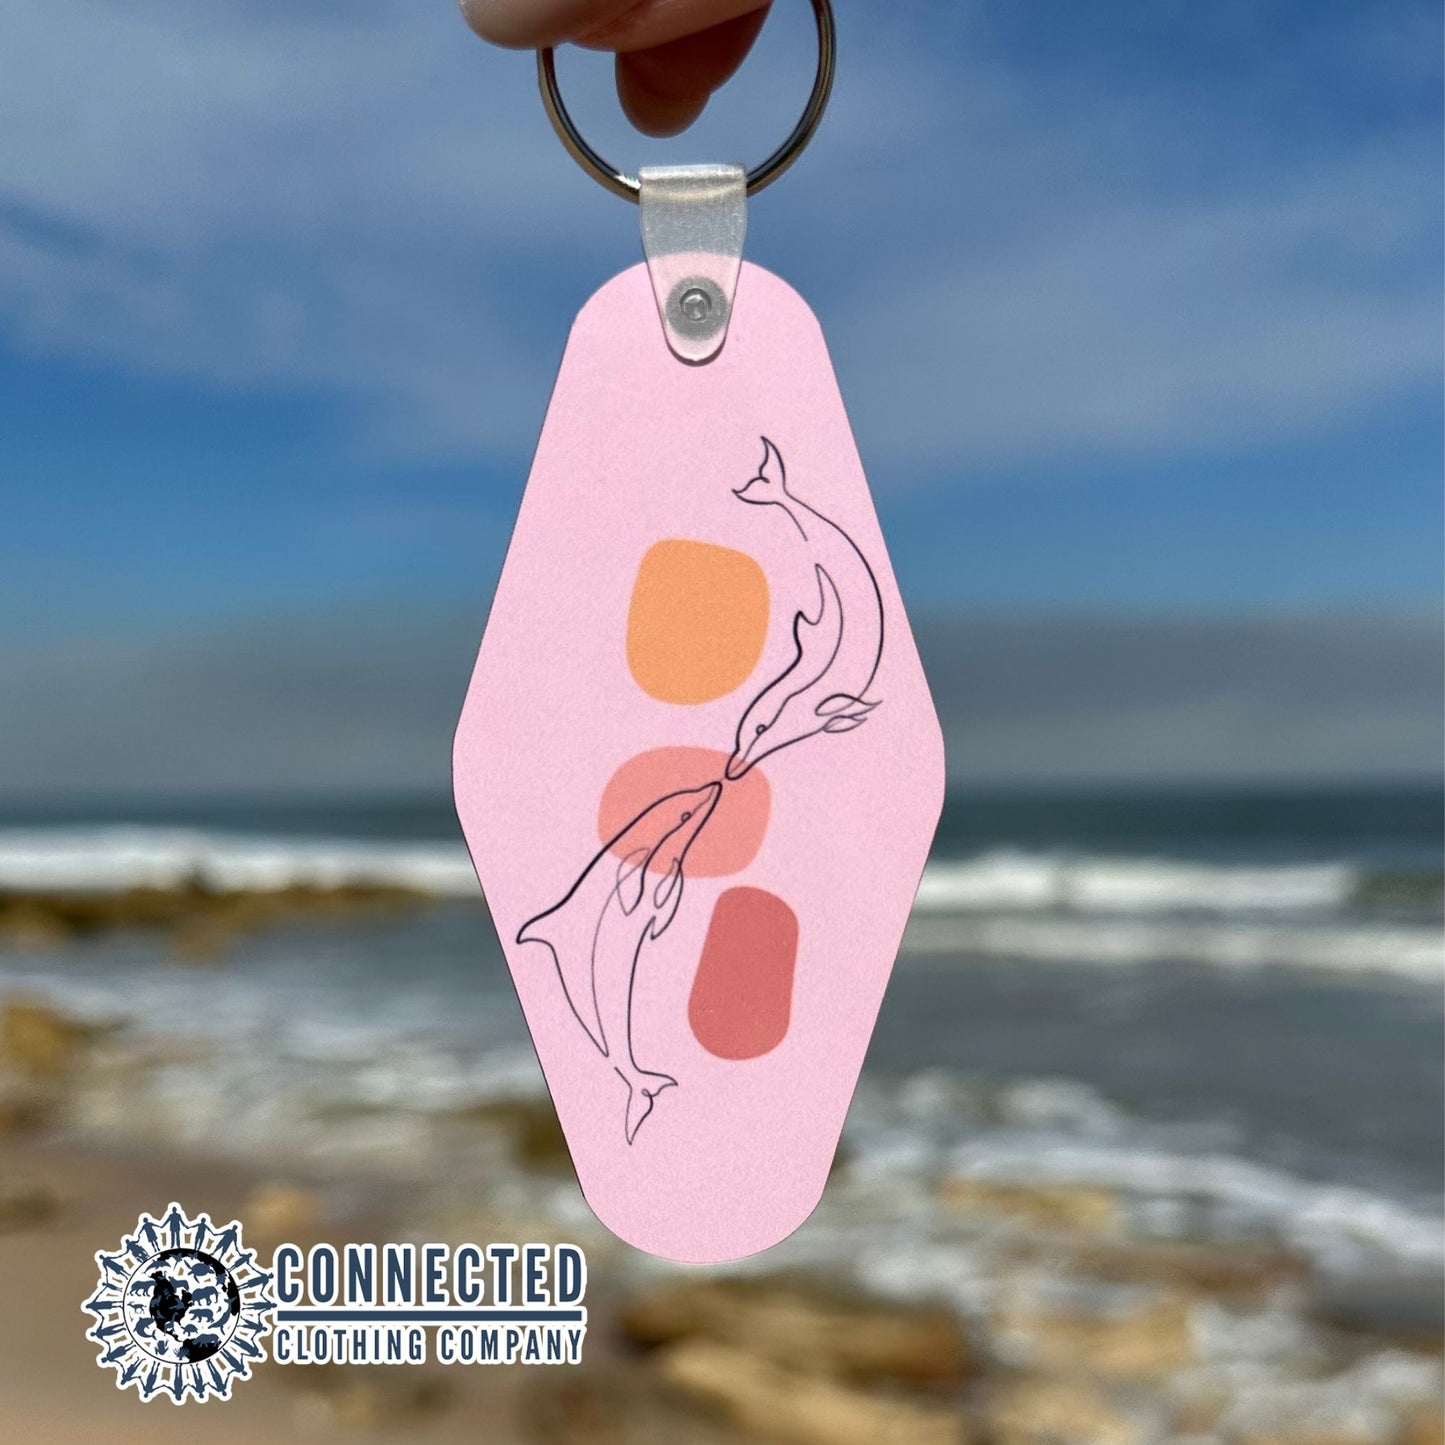 Kissing Dolphins Keychain - Connected Clothing Company - 10% of proceeds donated to ocean conservation